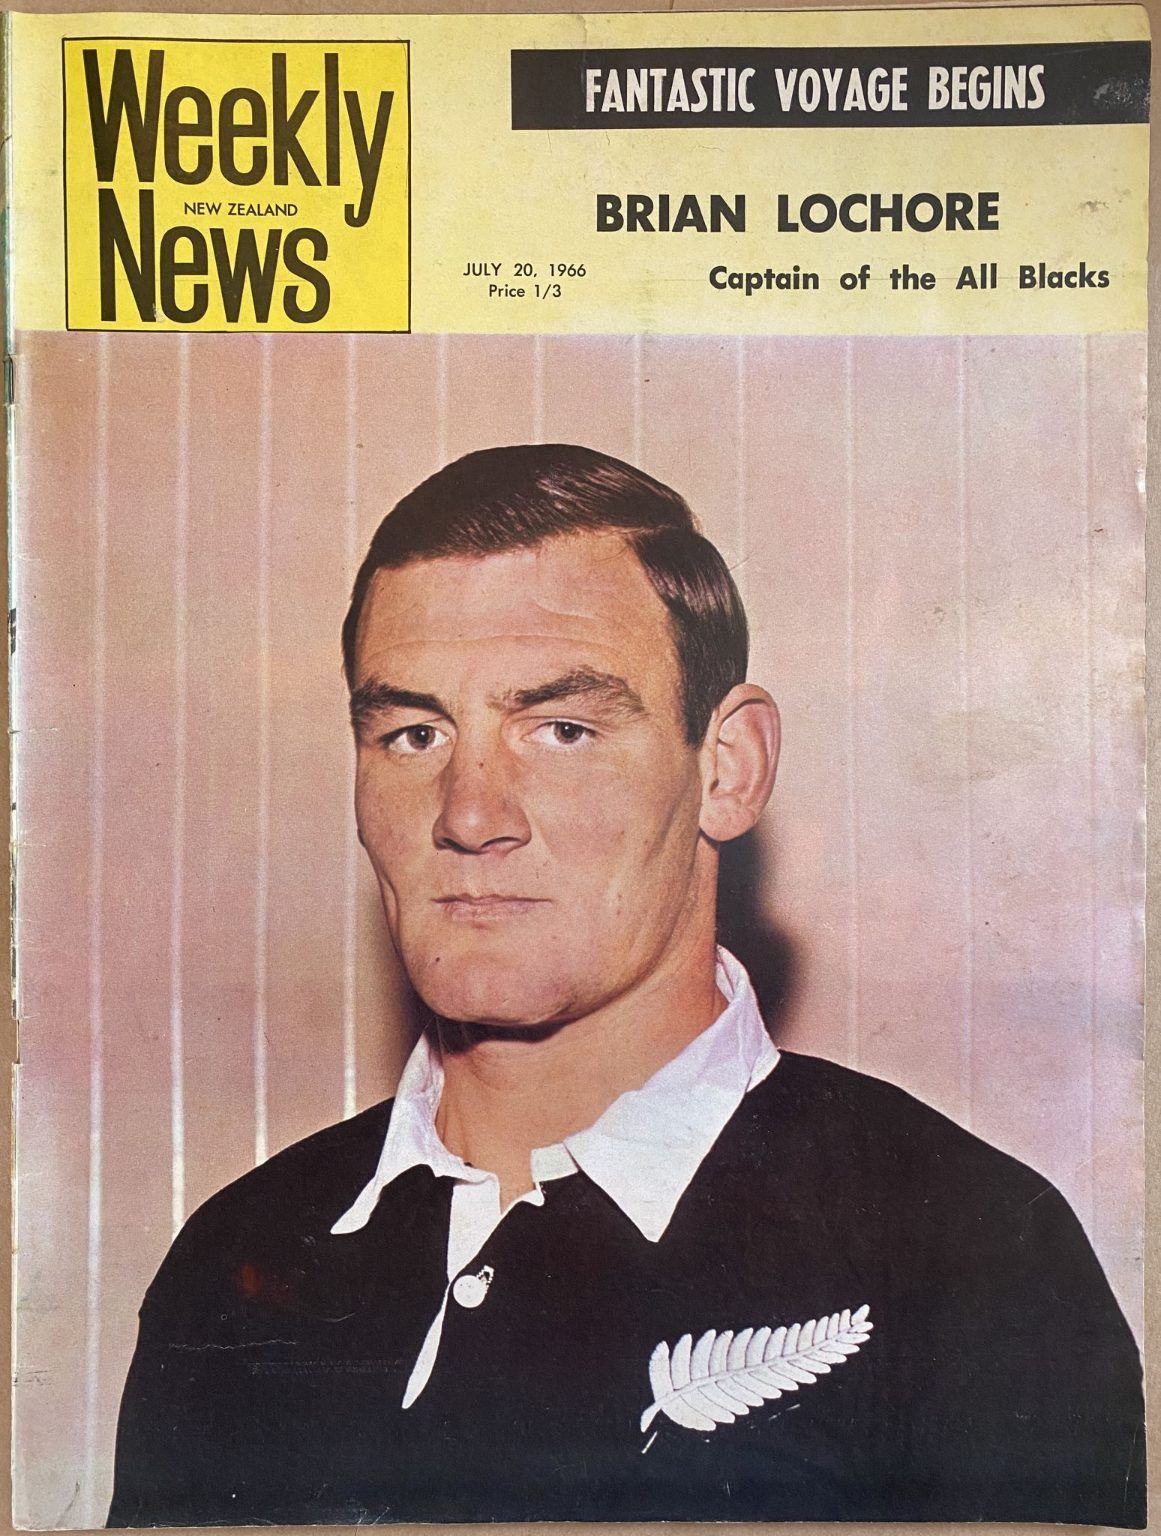 OLD NEWSPAPER: New Zealand Weekly News, No. 5356, 20 July 1966